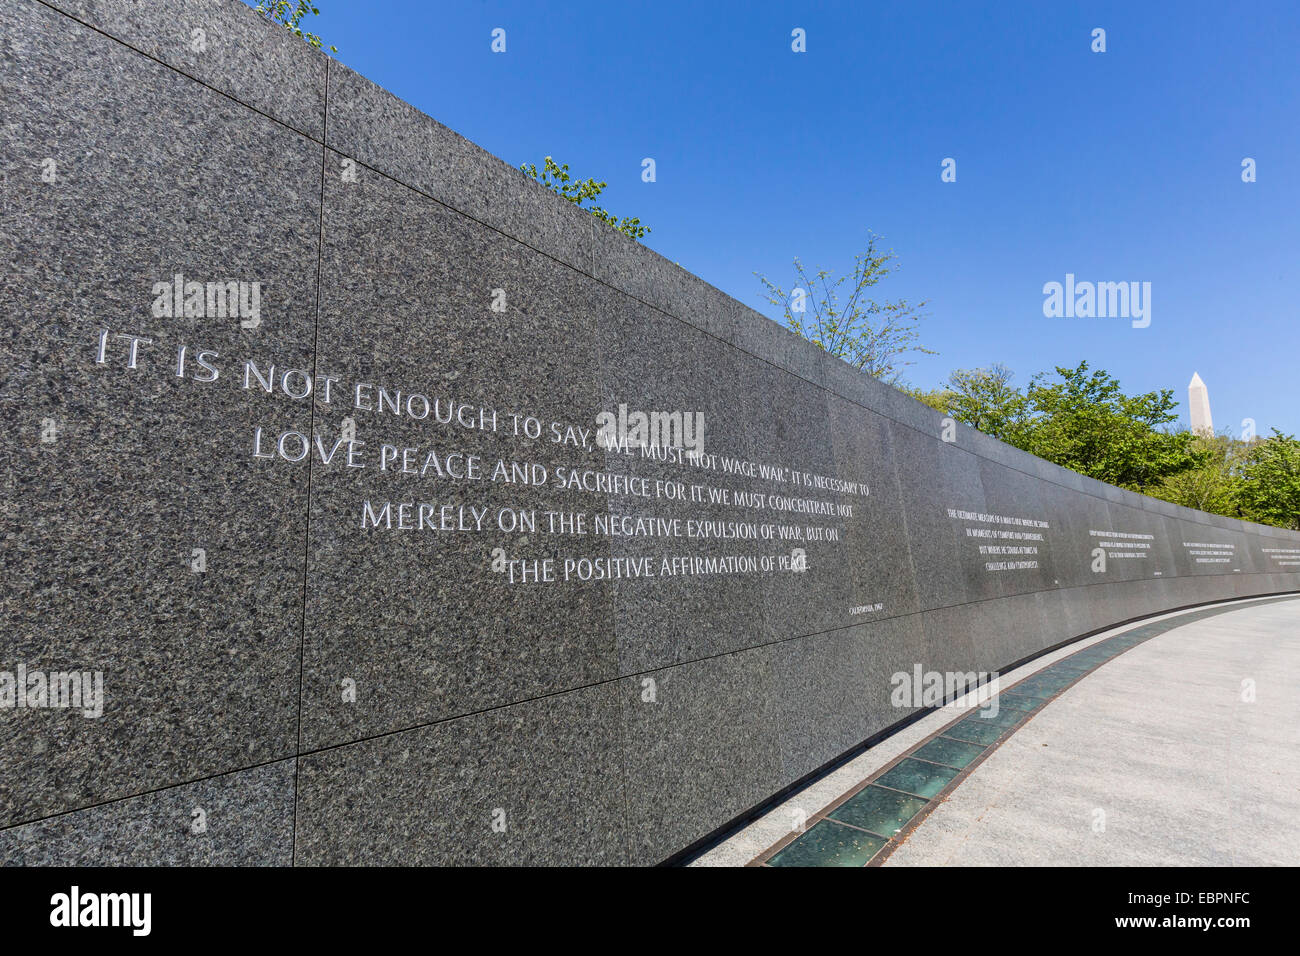 Exterior view of the Martin Luther King Memorial, Washington D.C., United States of America, North America Stock Photo